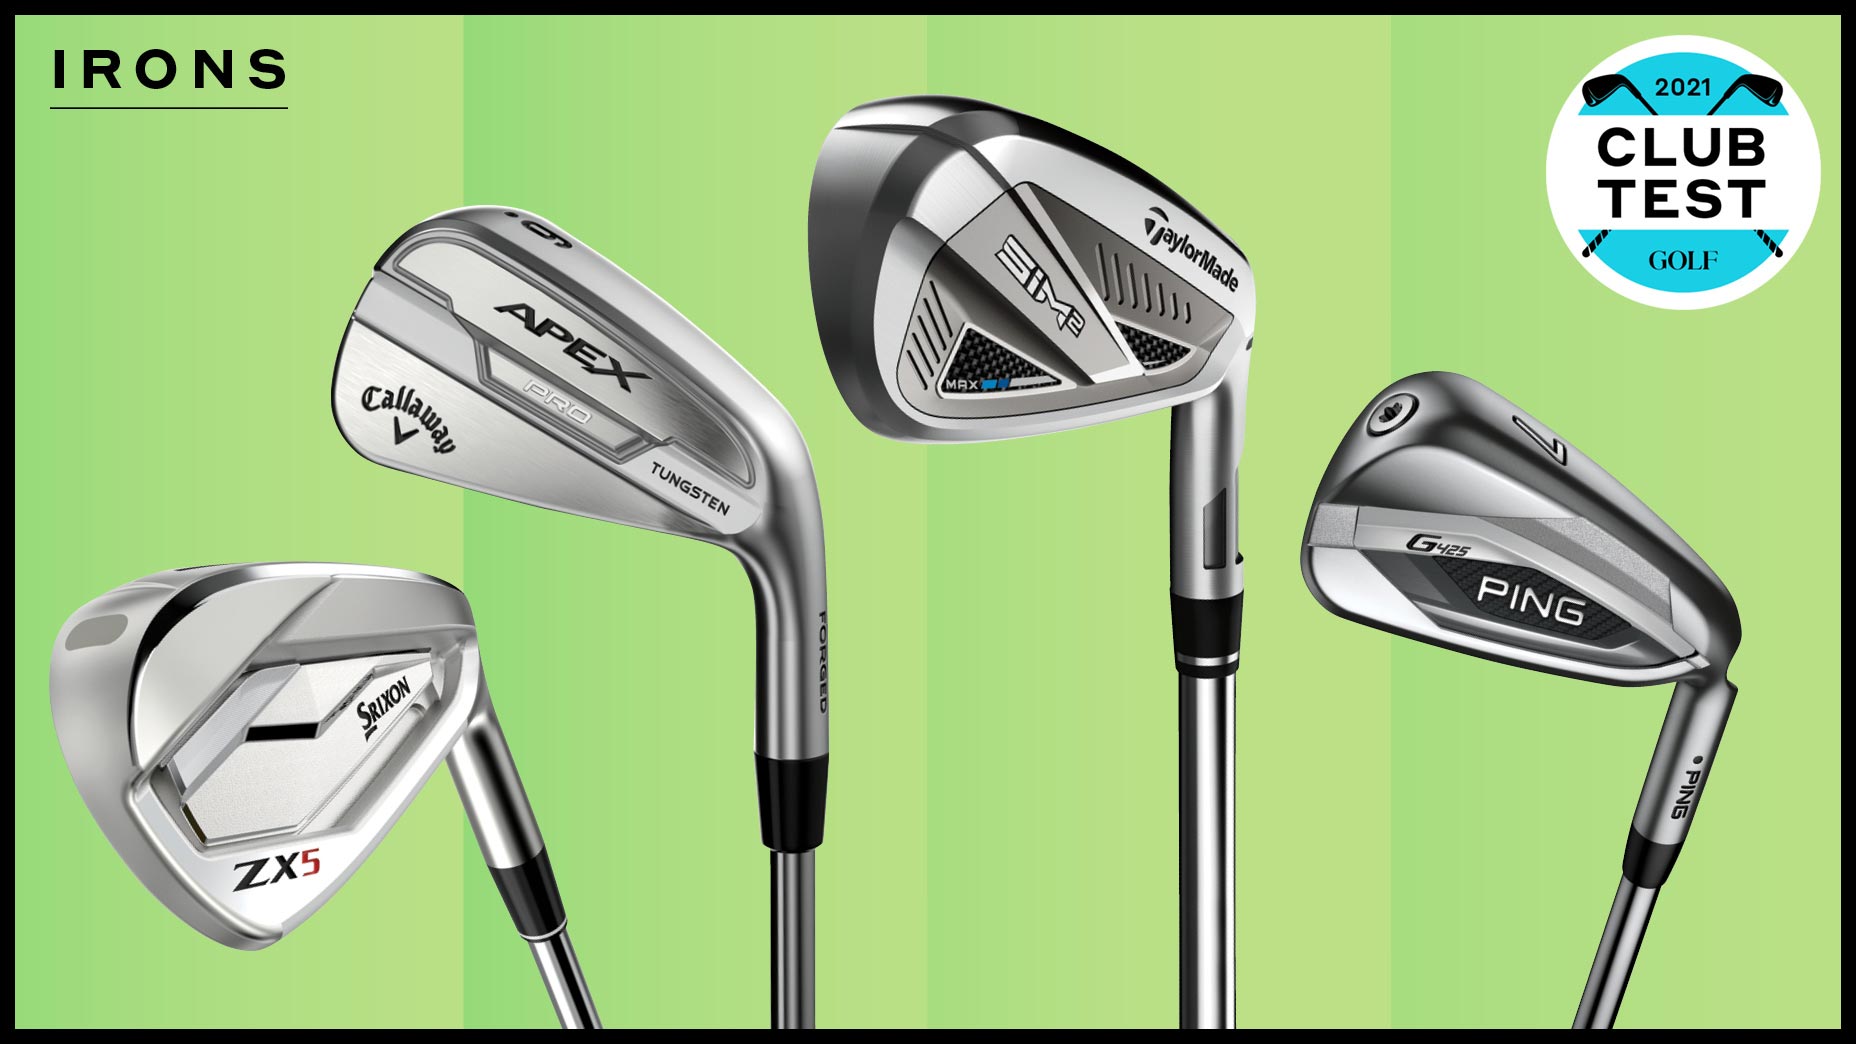 Best Irons 2021: 53 new irons tested and | ClubTest 2021